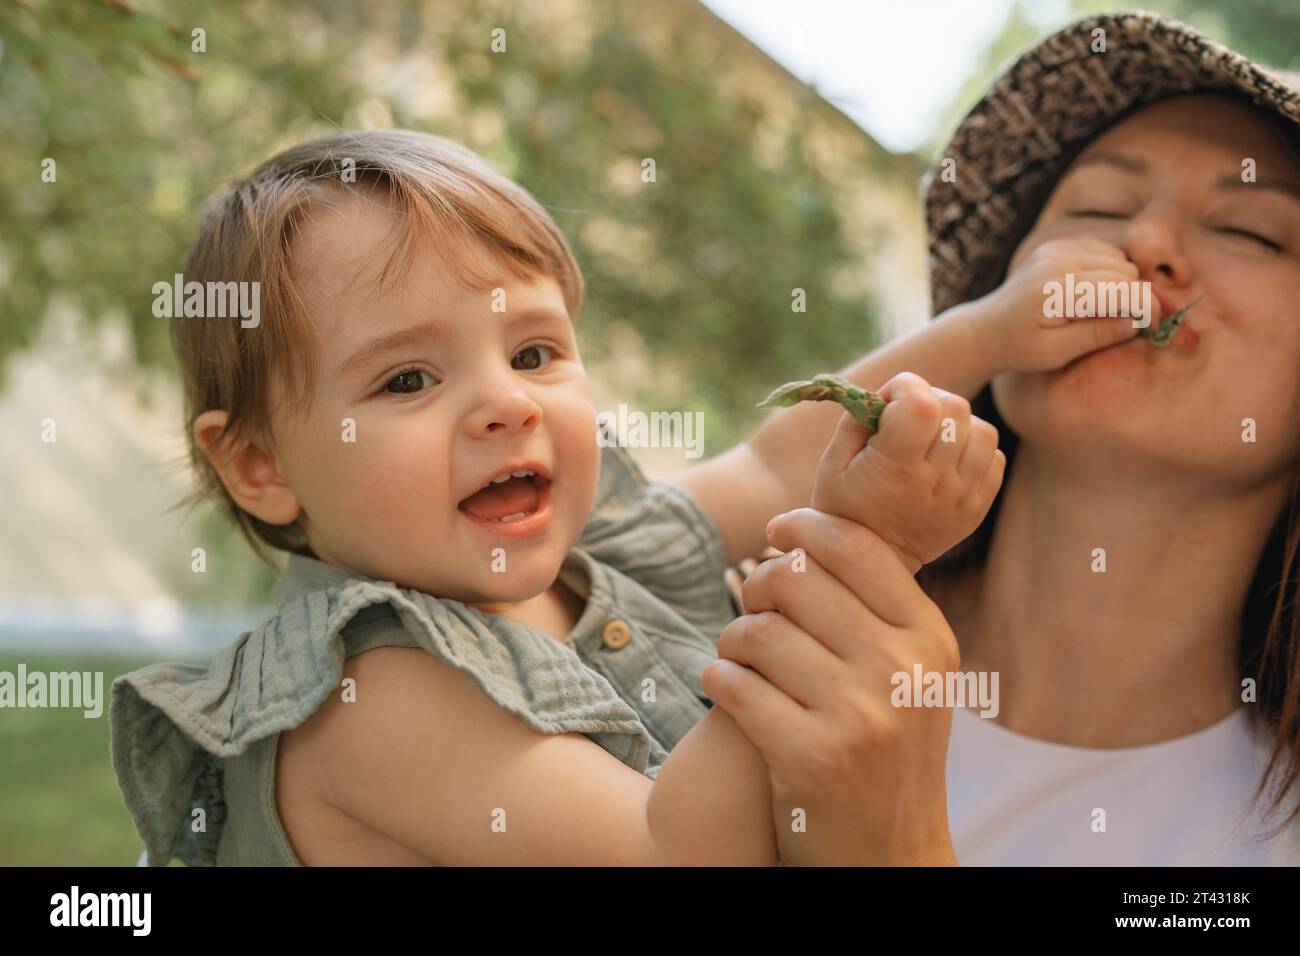 Mother holding her daughter who is putting a leaf in her mouth, Belarus Stock Photo